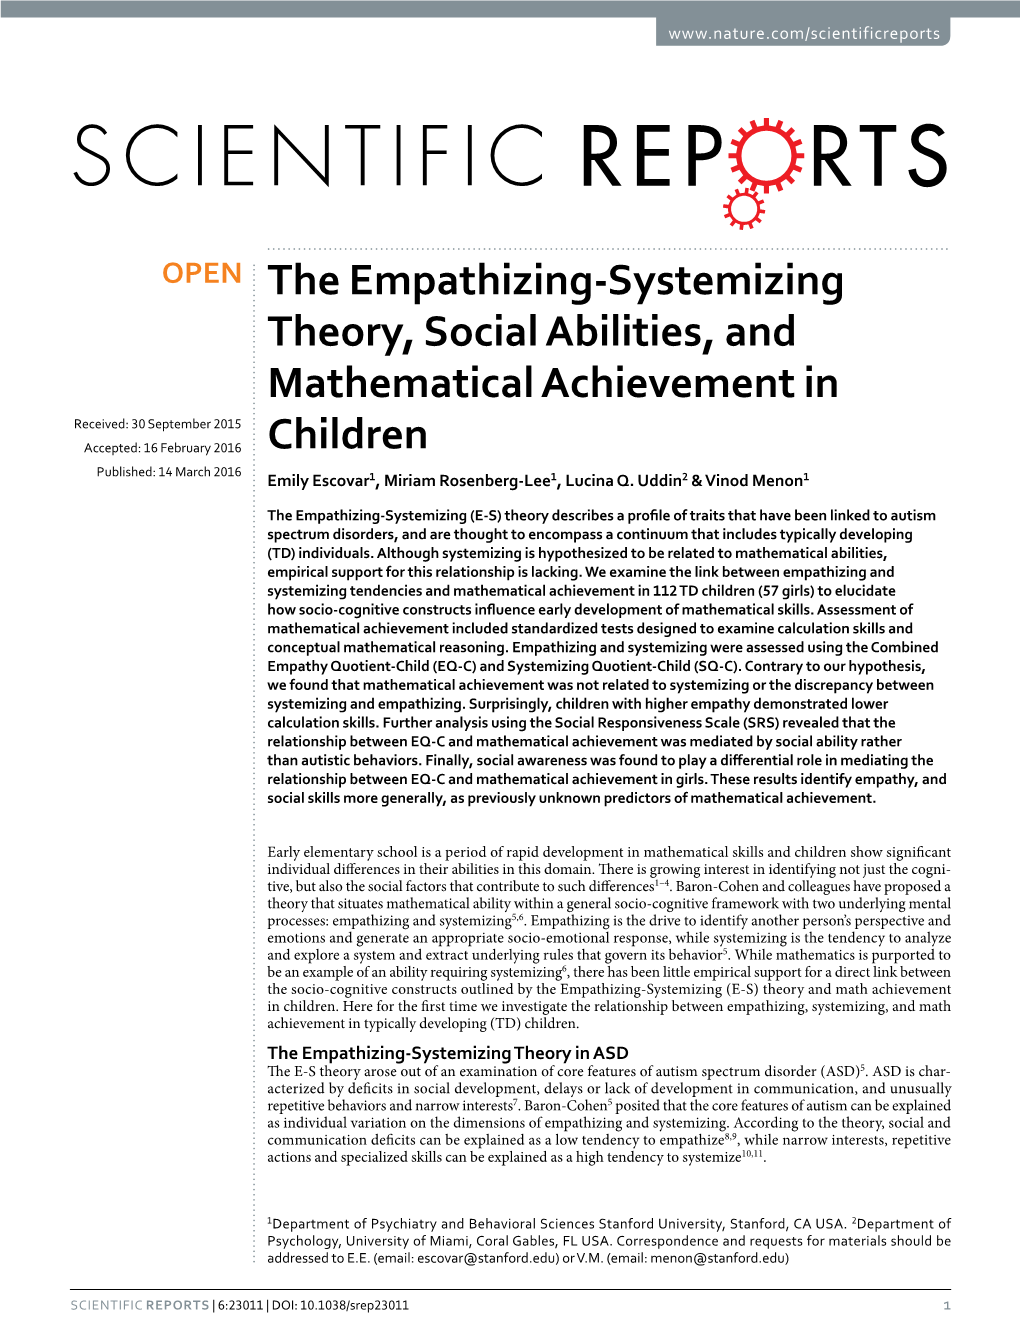 The Empathizing-Systemizing Theory, Social Abilities, and Mathematical Achievement in Children